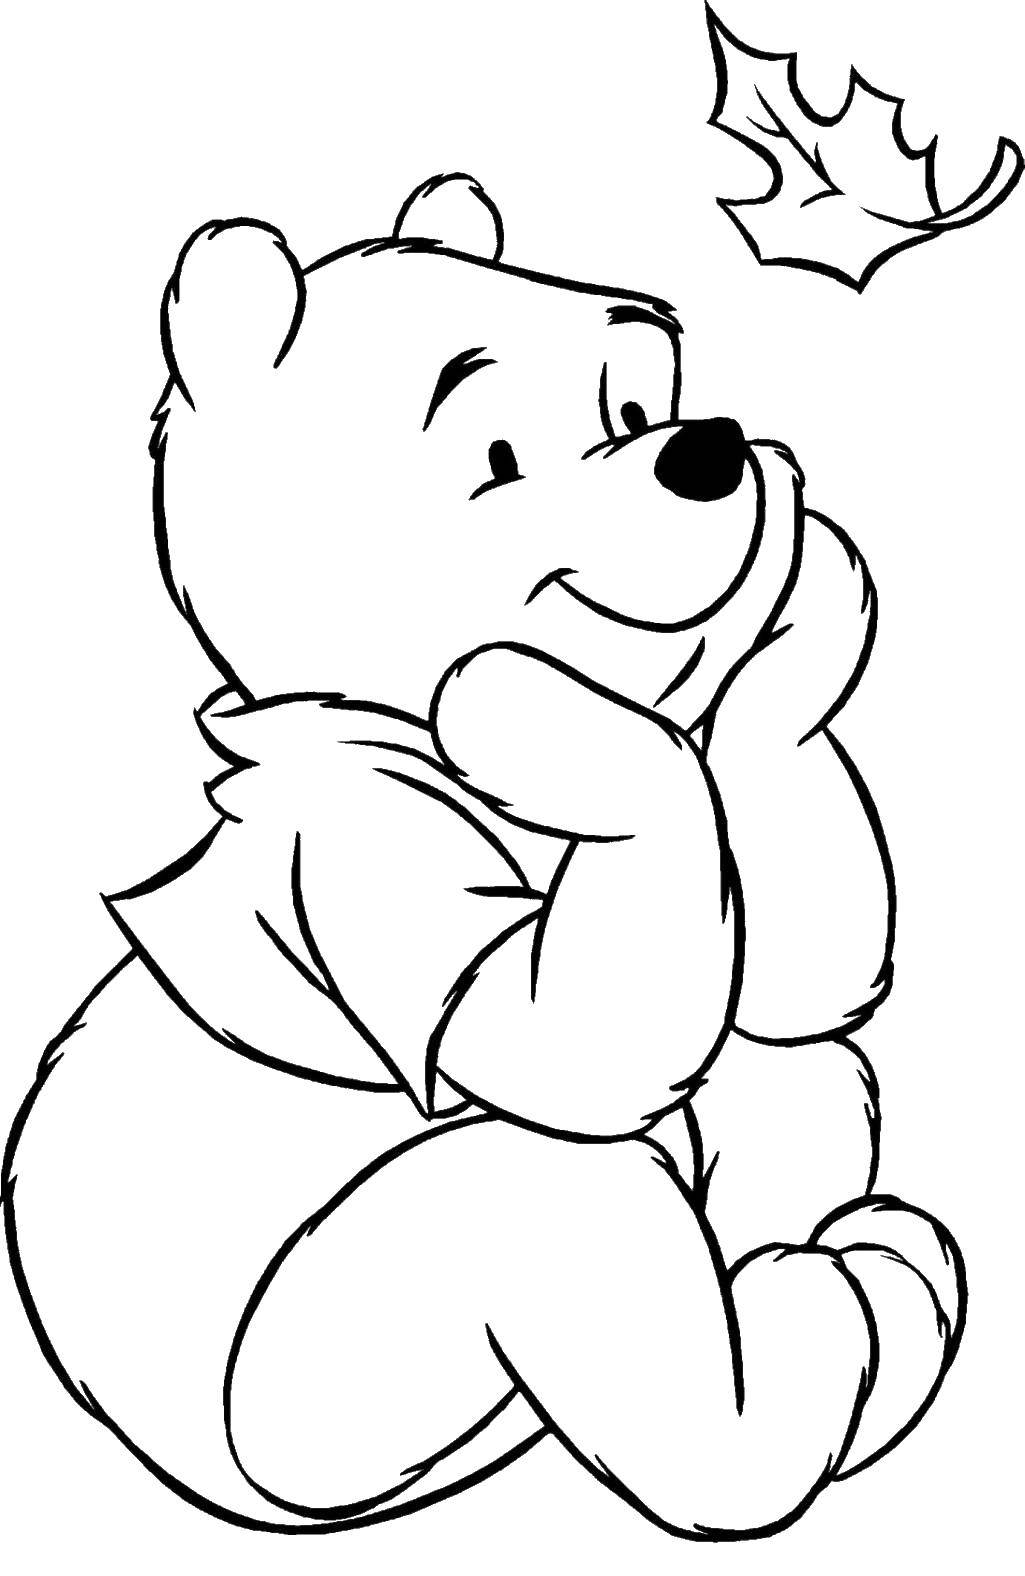 Coloring Winnie the Pooh. Category cartoons. Tags:  Cartoon character, Winnie the Pooh.